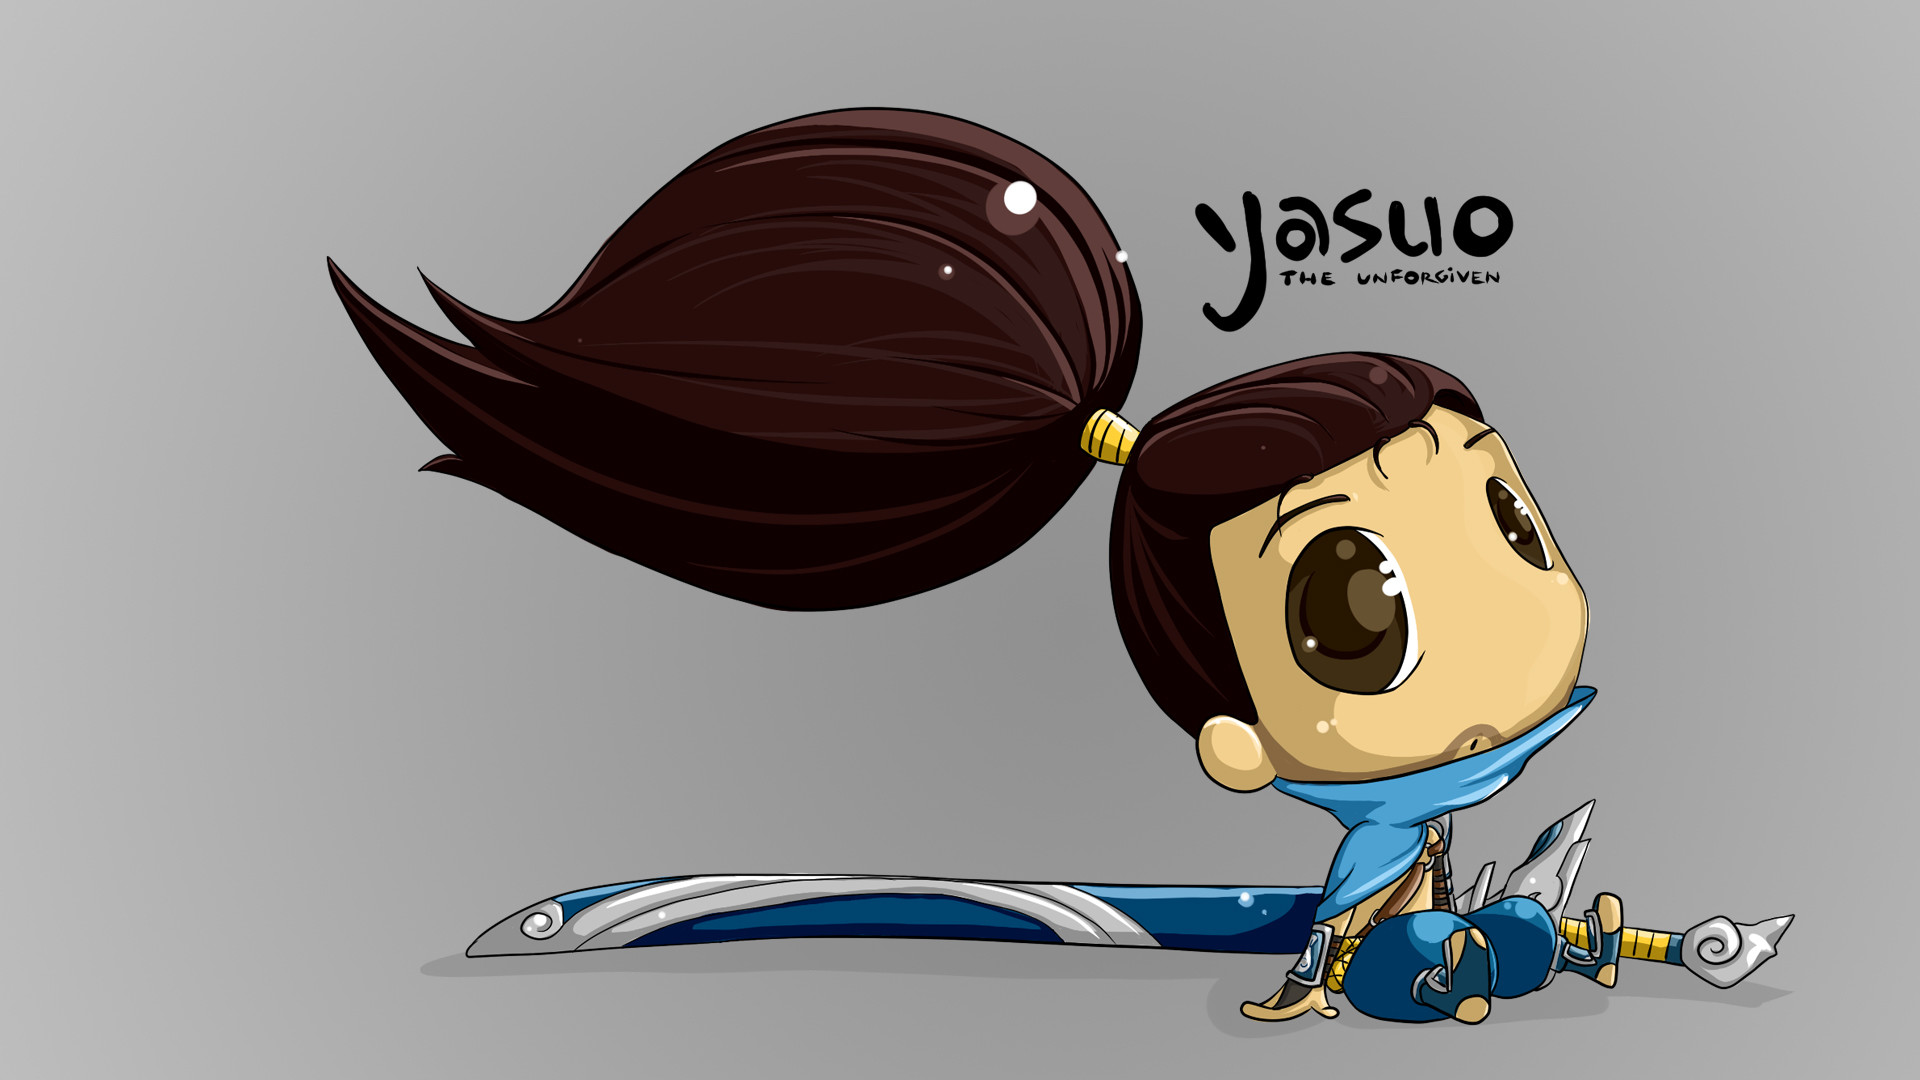 1920x1080 ... Image Result For Image Result For Wallpaper Iphone Yasuo ...